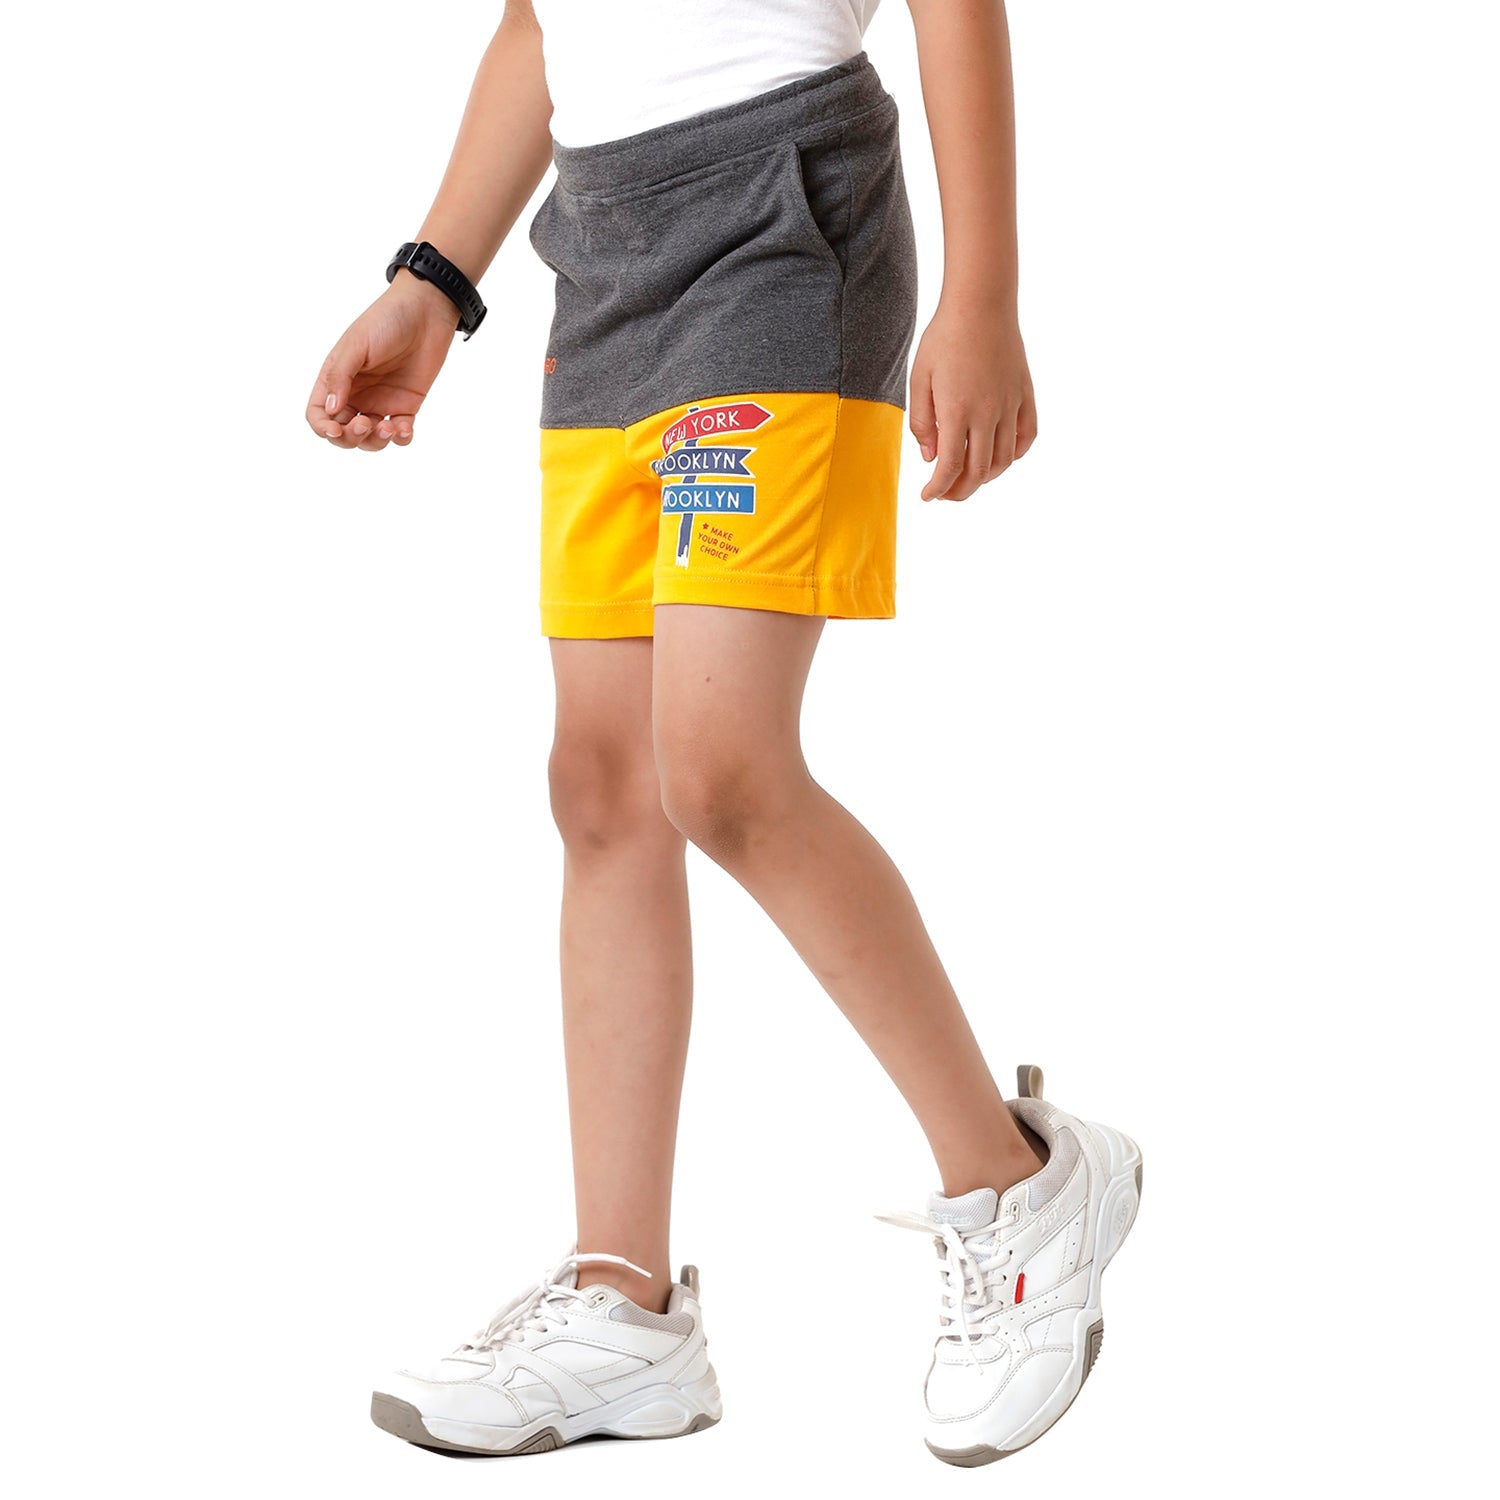 Classic Polo Bro Boys Color Block Slim Fit Grey with Yellow Color Cotton Shorts - BBTS 02 B Shorts Classic Polo 